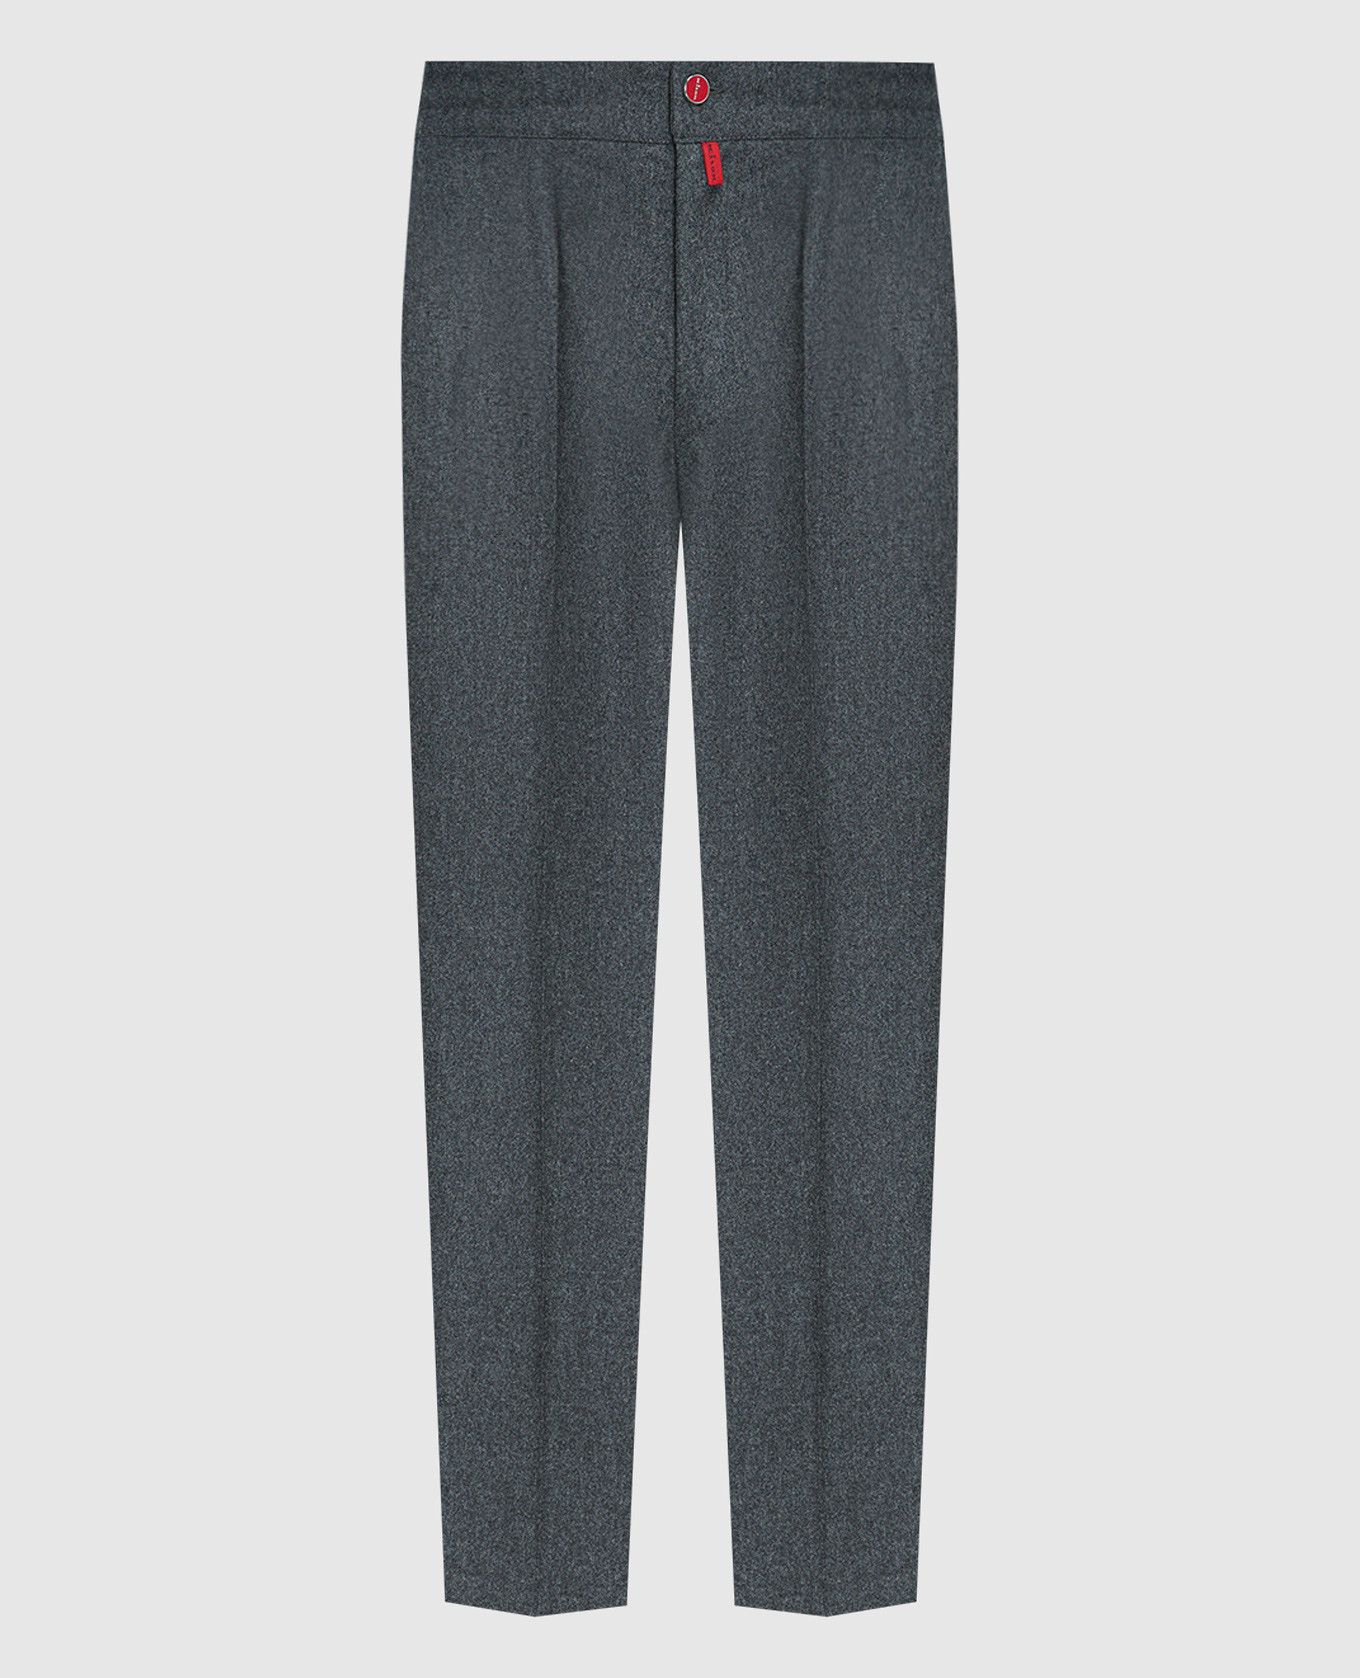 Gray wool trousers with logo